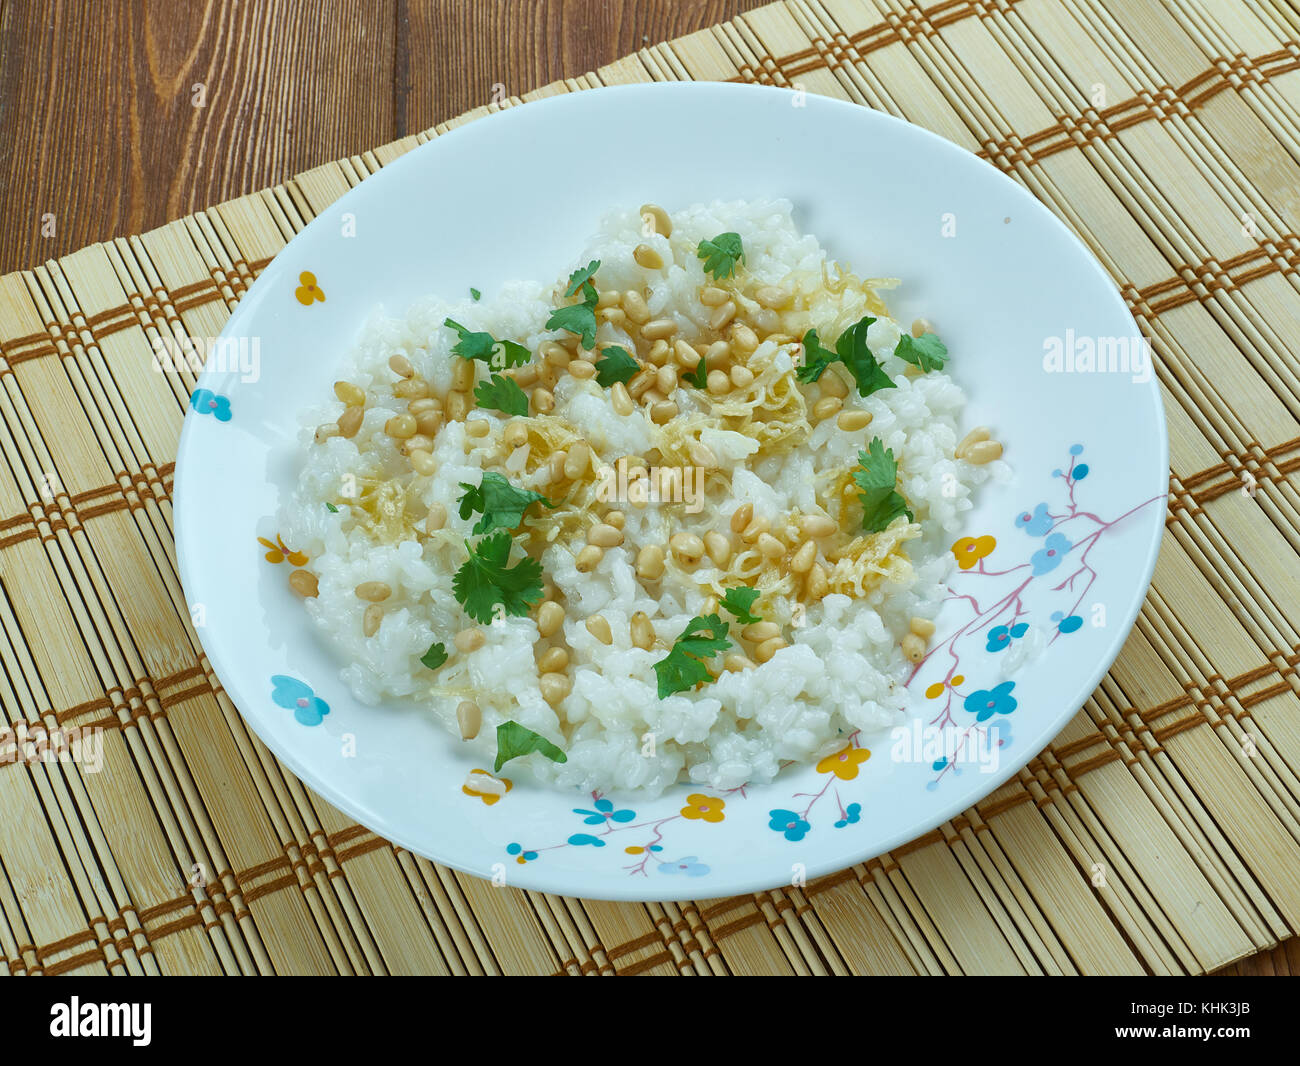 Lebanese Rice With Vermicellimediterranean Dish Stock Photo Alamy